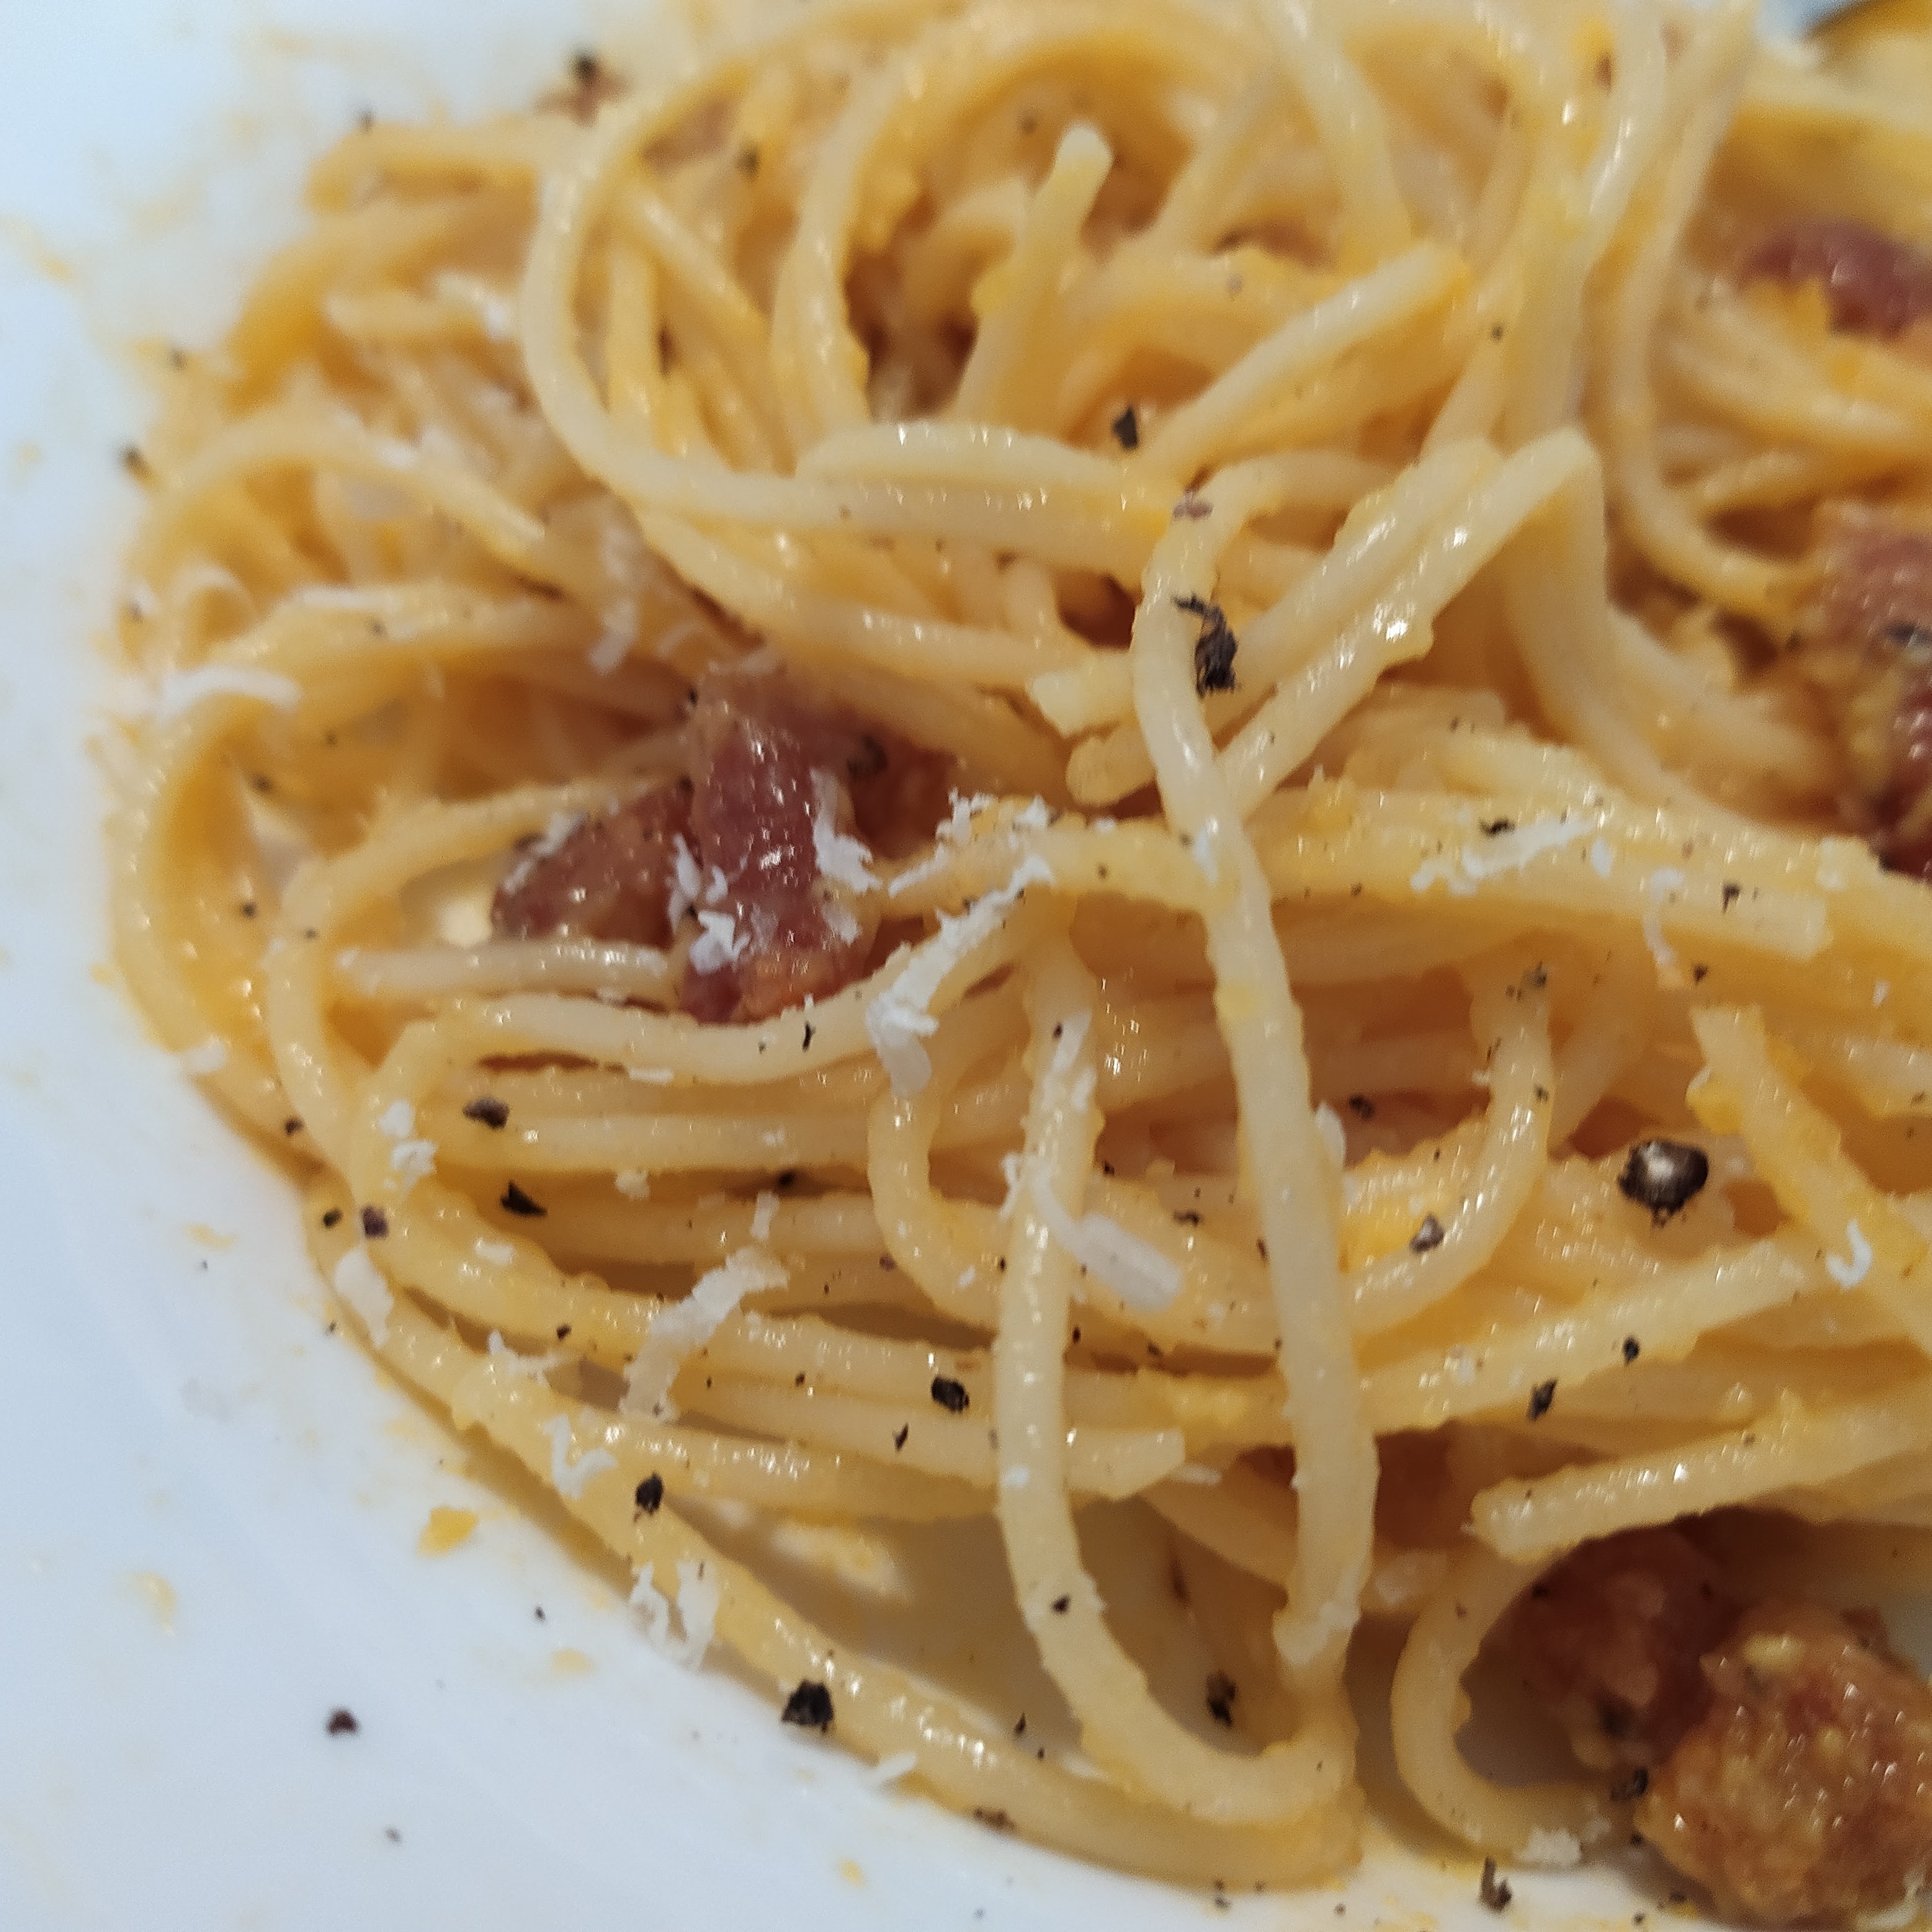 The last time I tried making "carbonara" was one year ago. It's not something I should try on an average Tuesday, maybe next weekend. #carbonaraday Guanciale and Pecorino are not easy to find around here, btw.